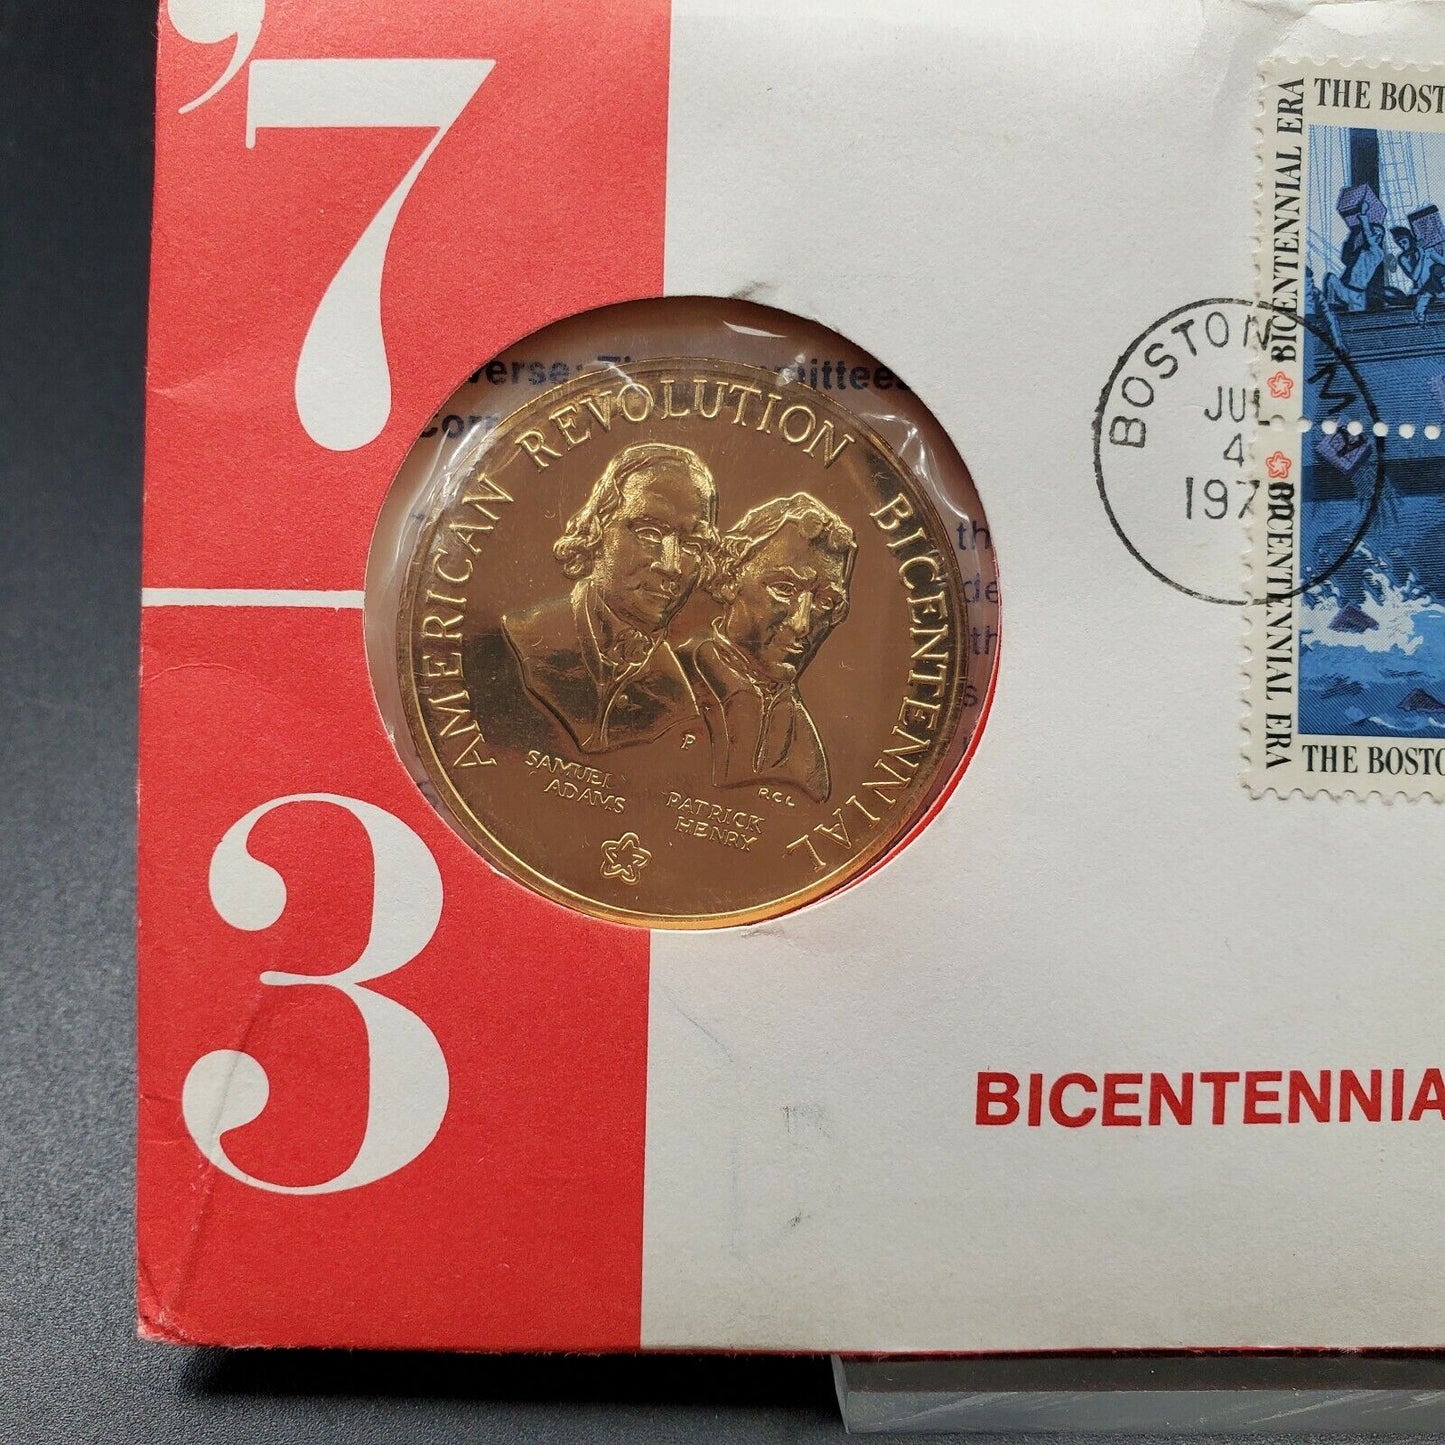 1973 BICENTENNIAL First Day Cover Commemorative Medal & Stamps ADAMS & HENRY